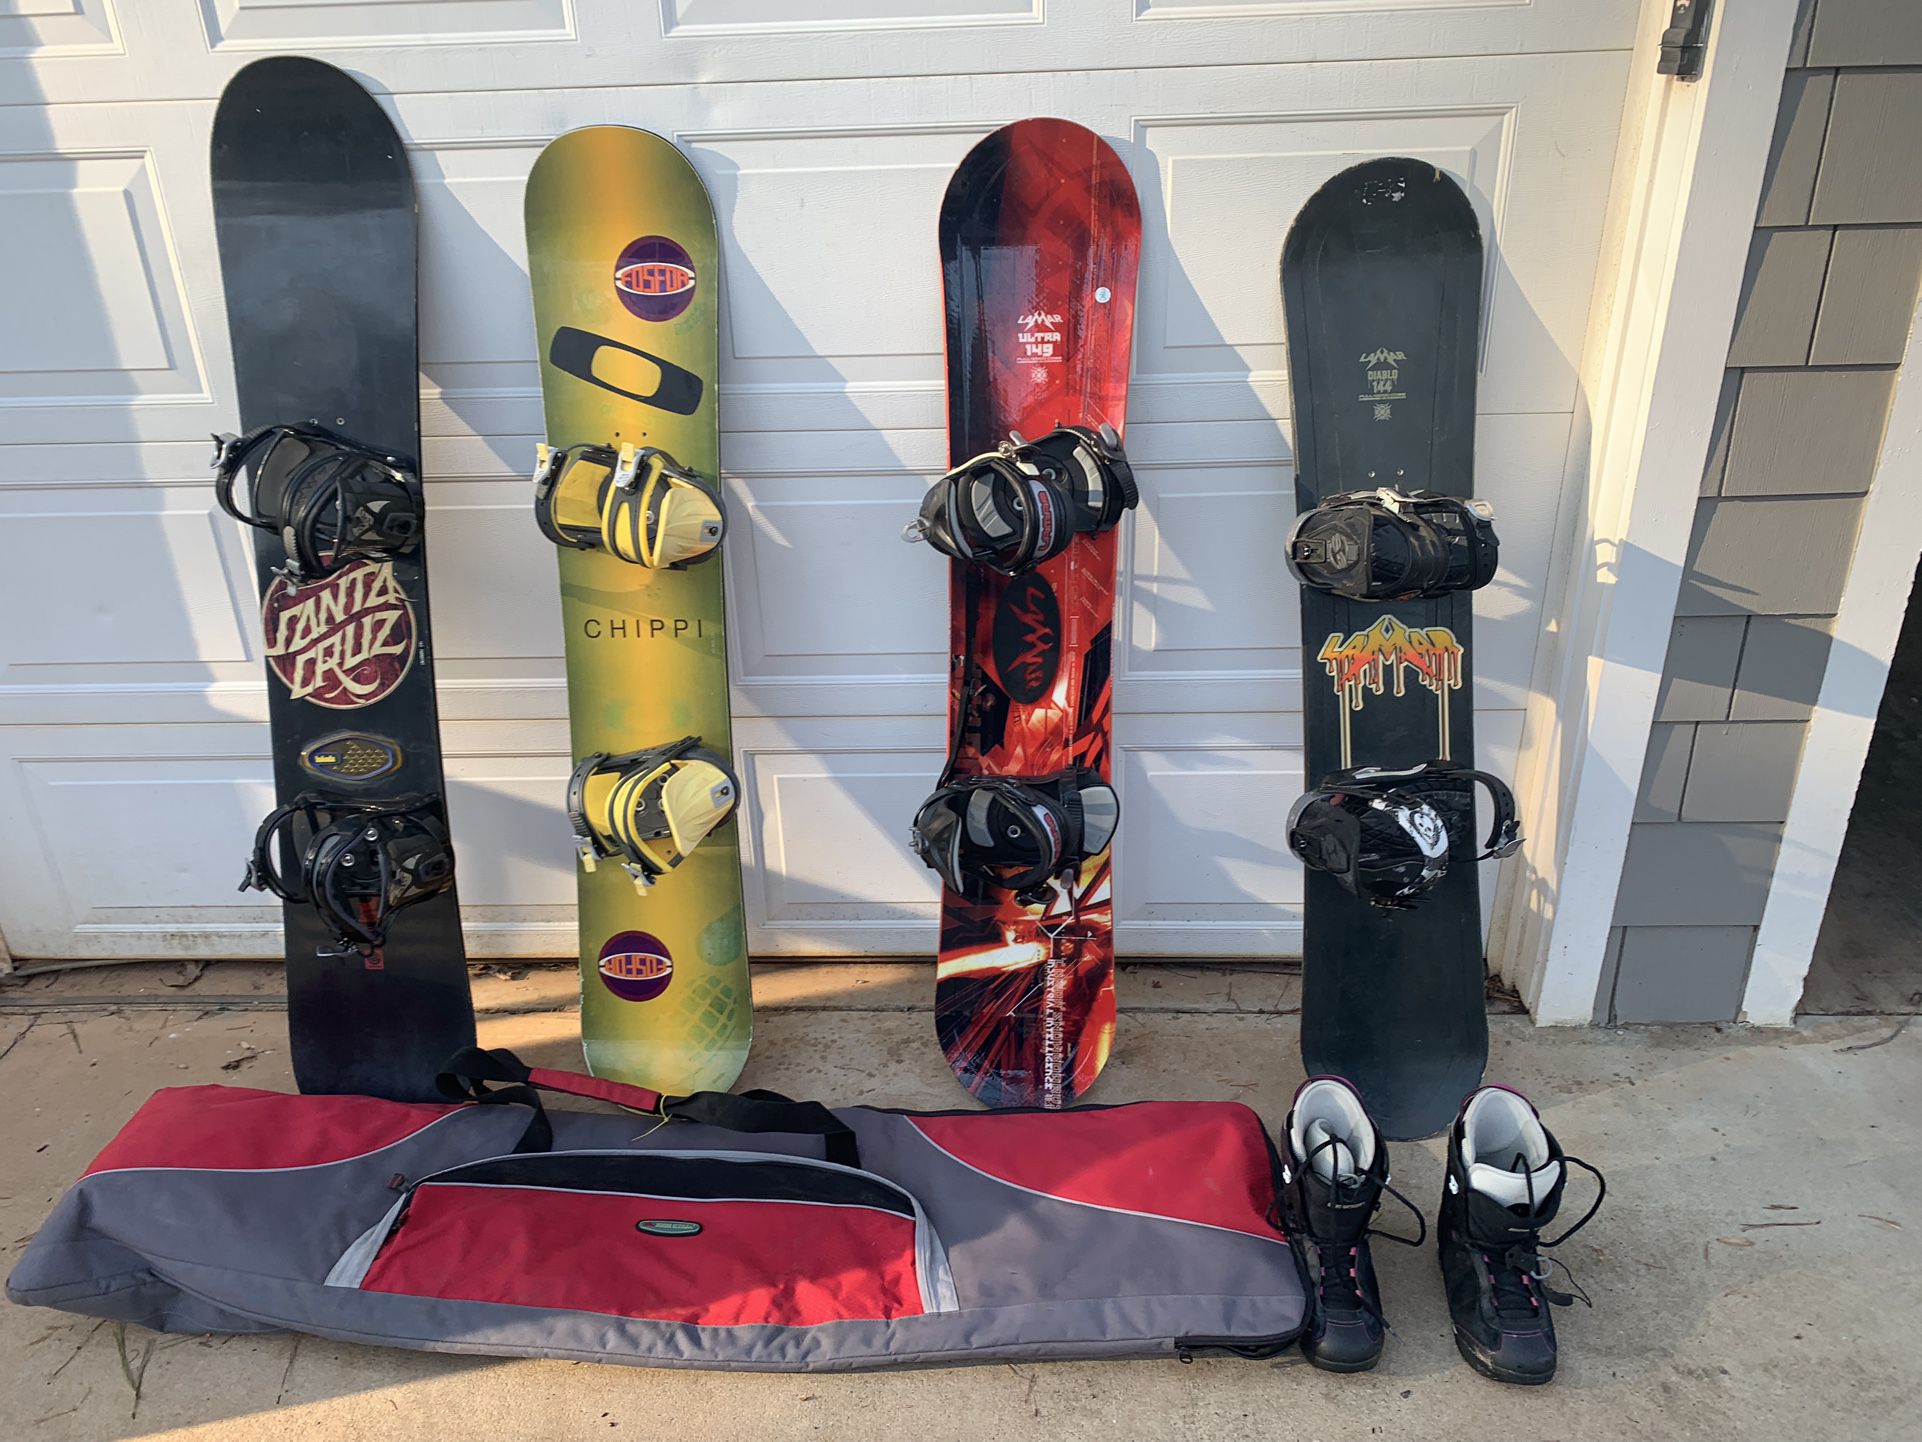 Snowboards. And Boots 7.5w